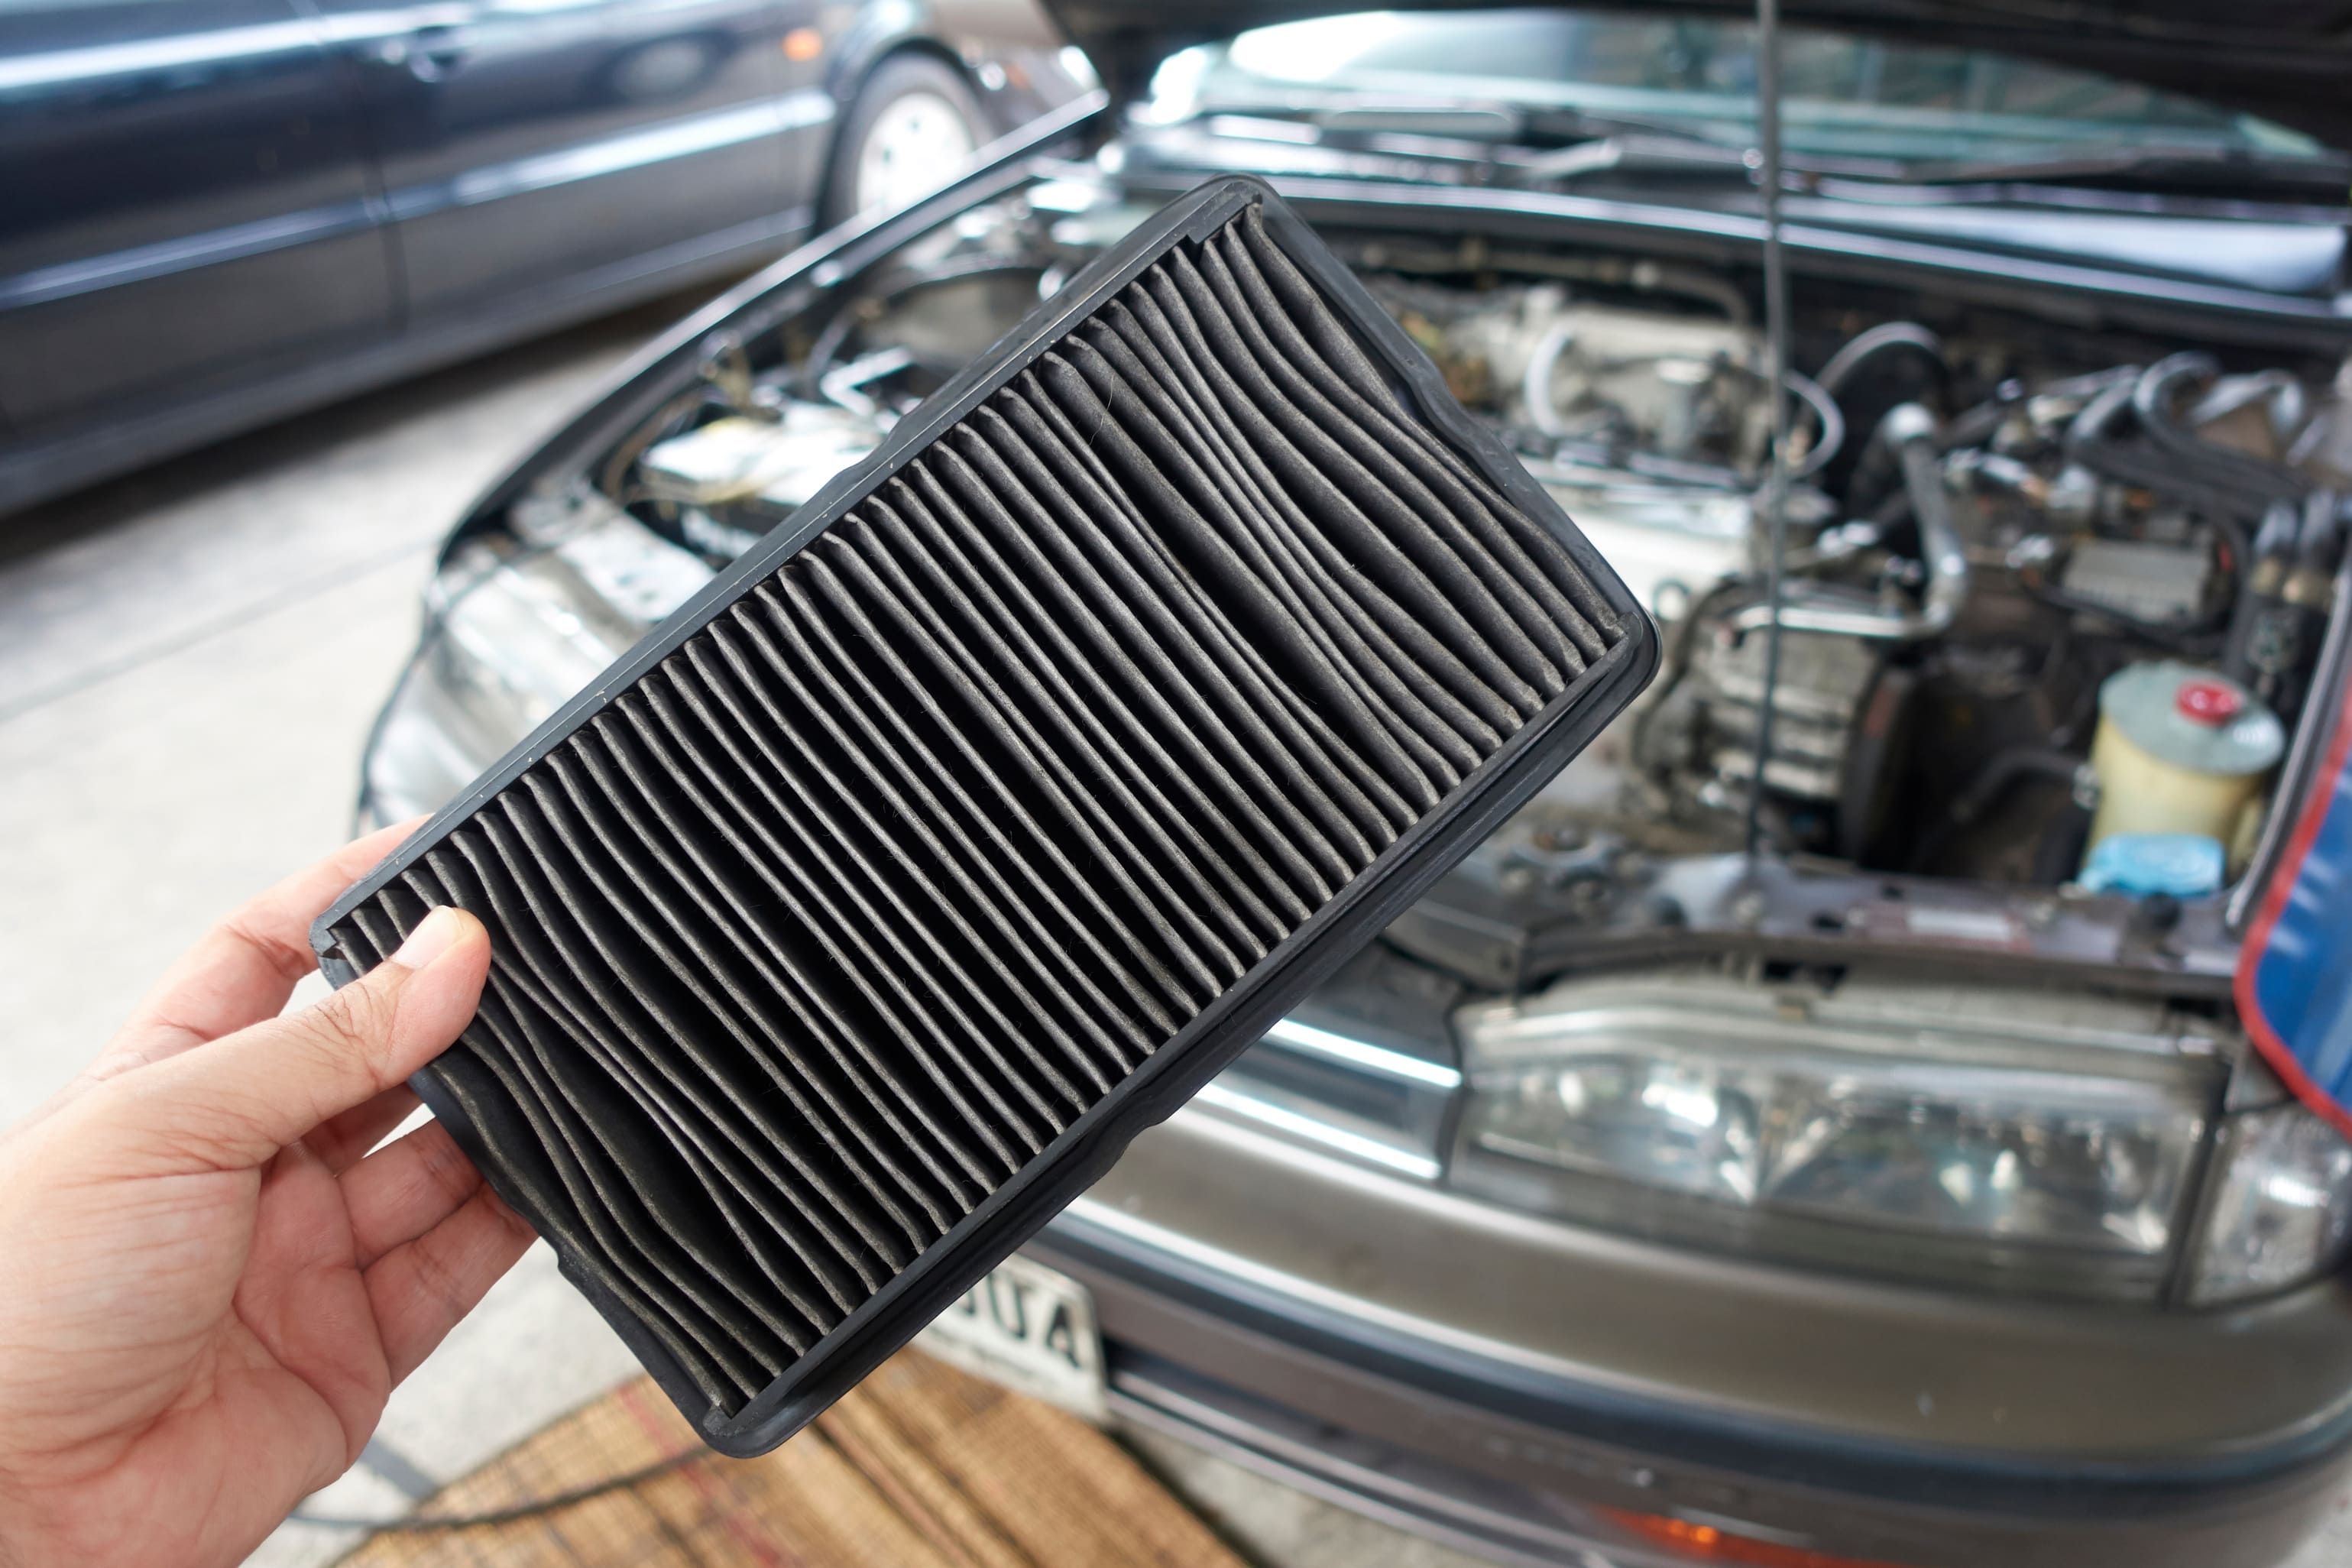 Learn More About How Engine Air Filters Help Your Car